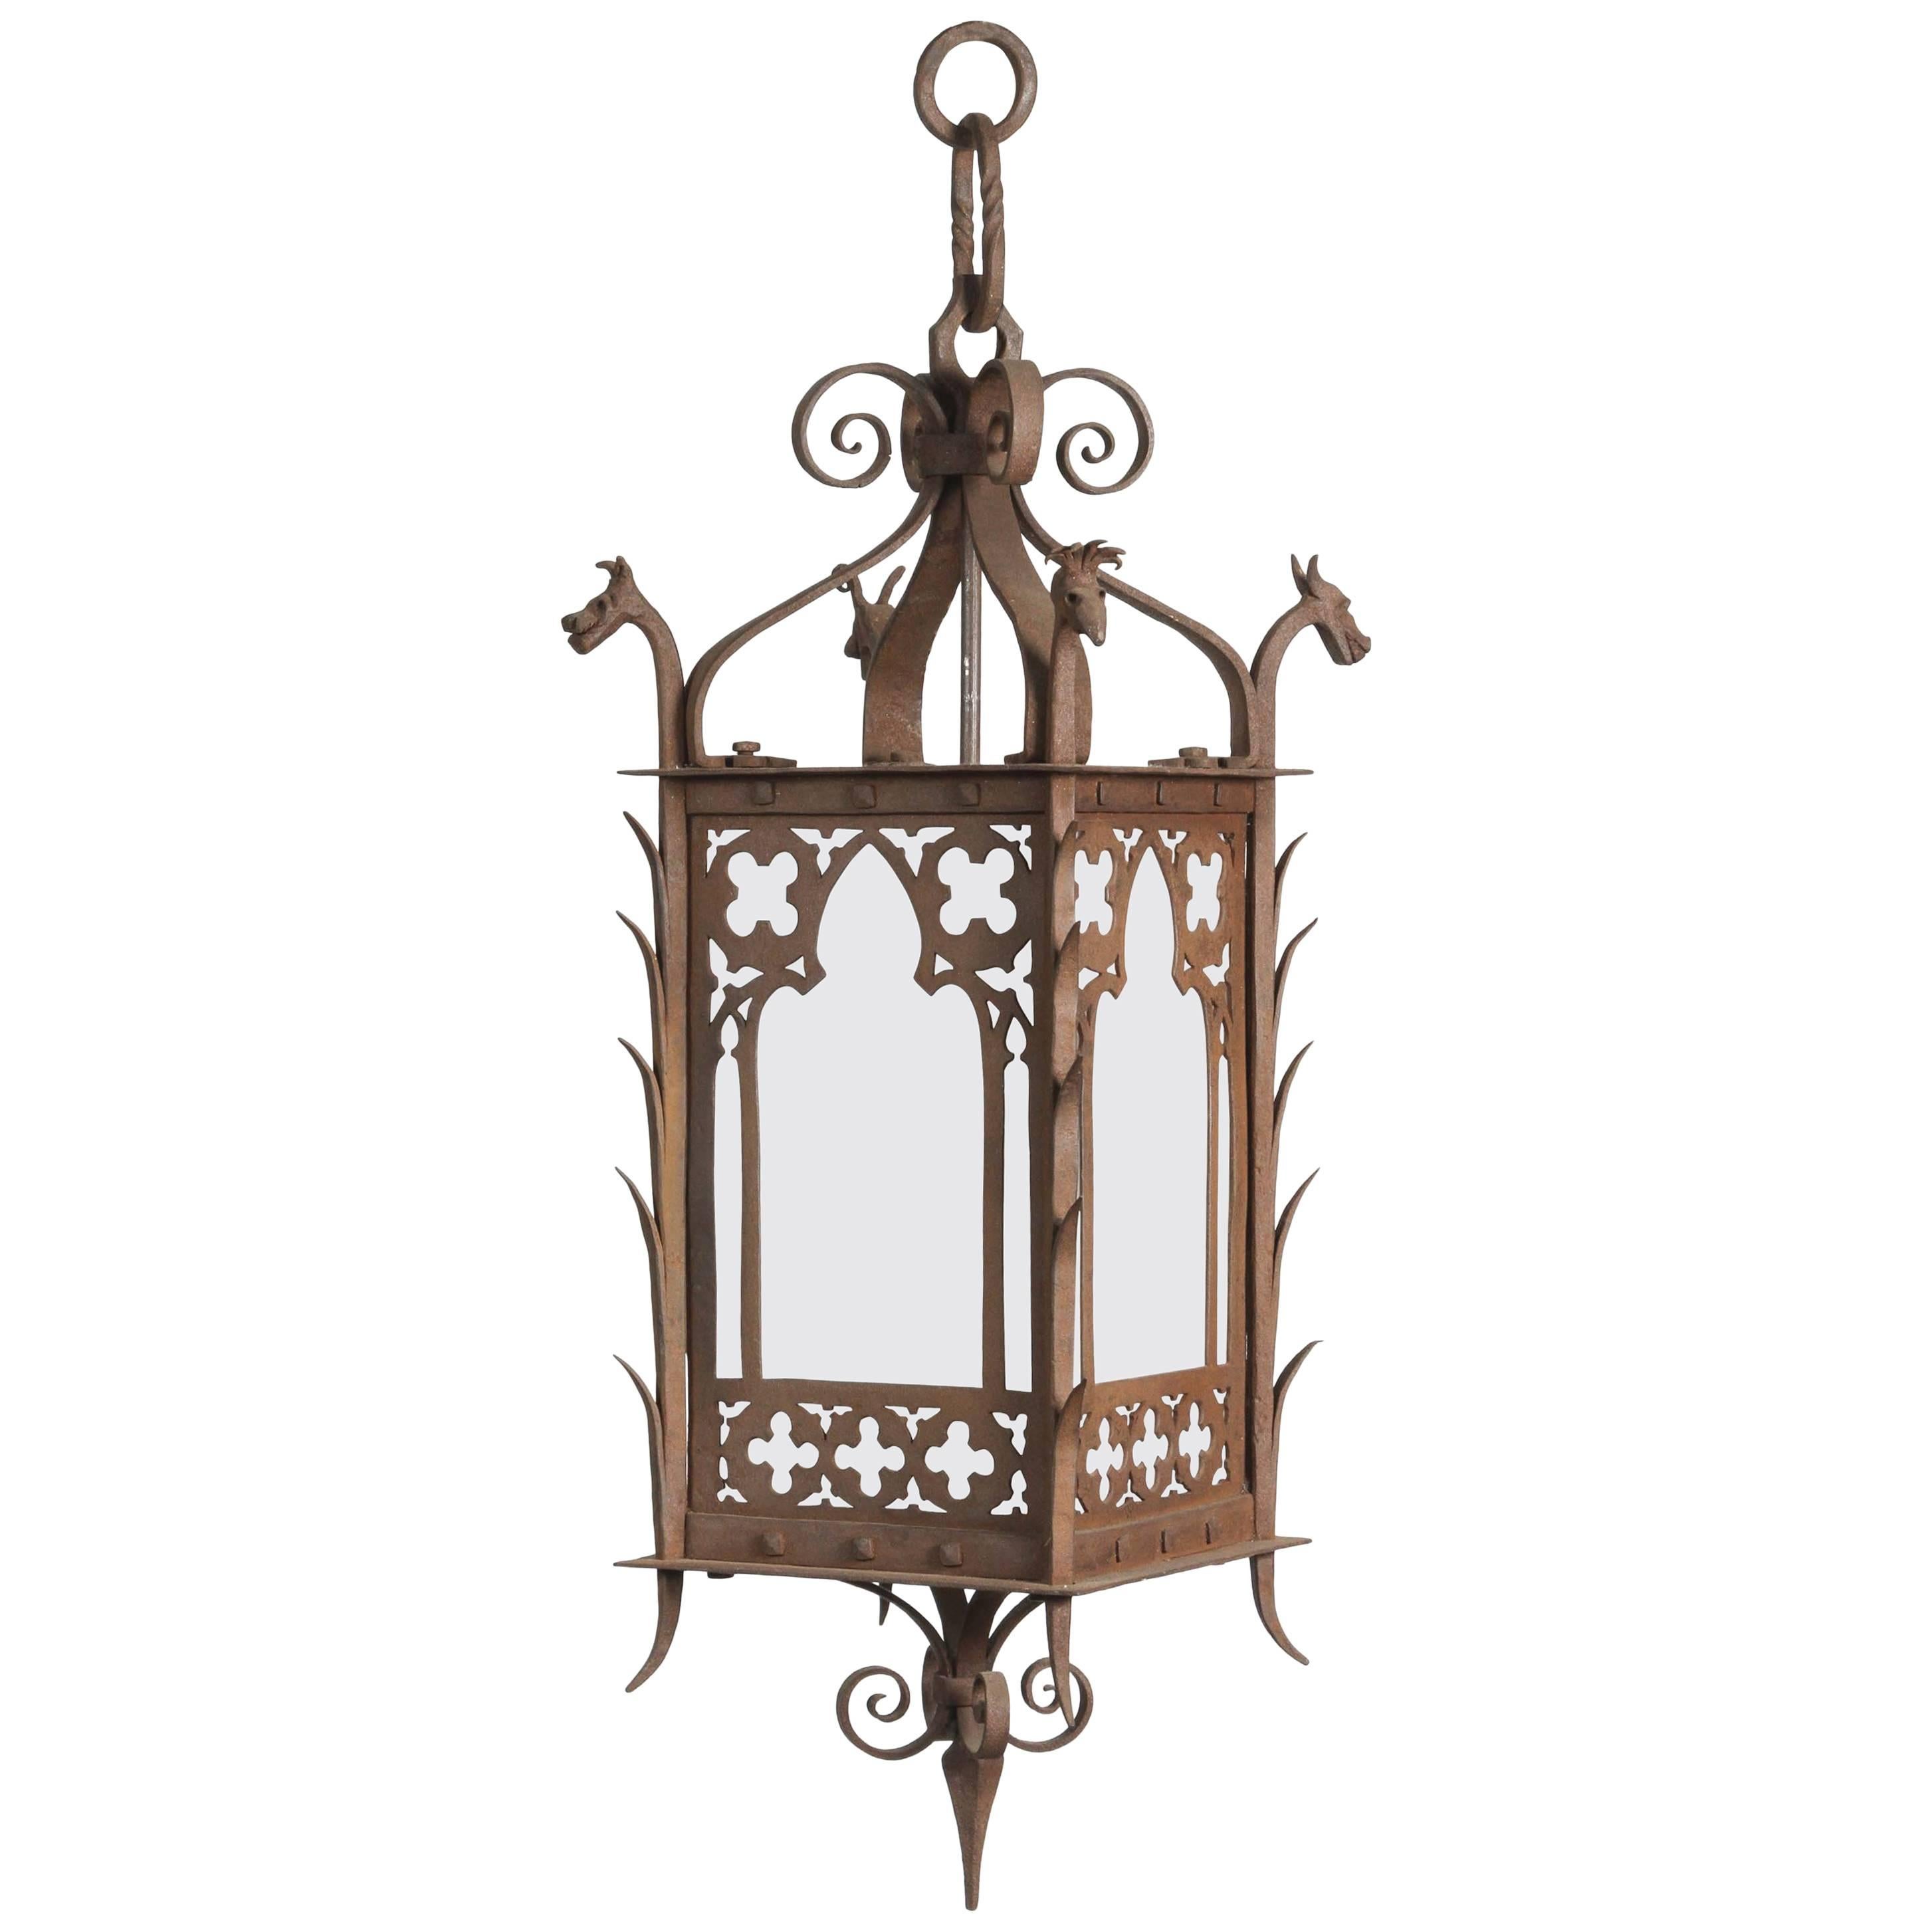 1920s Hand-Wrought Gothic Lantern with Four Dragon Heads with Milk Glass Panels